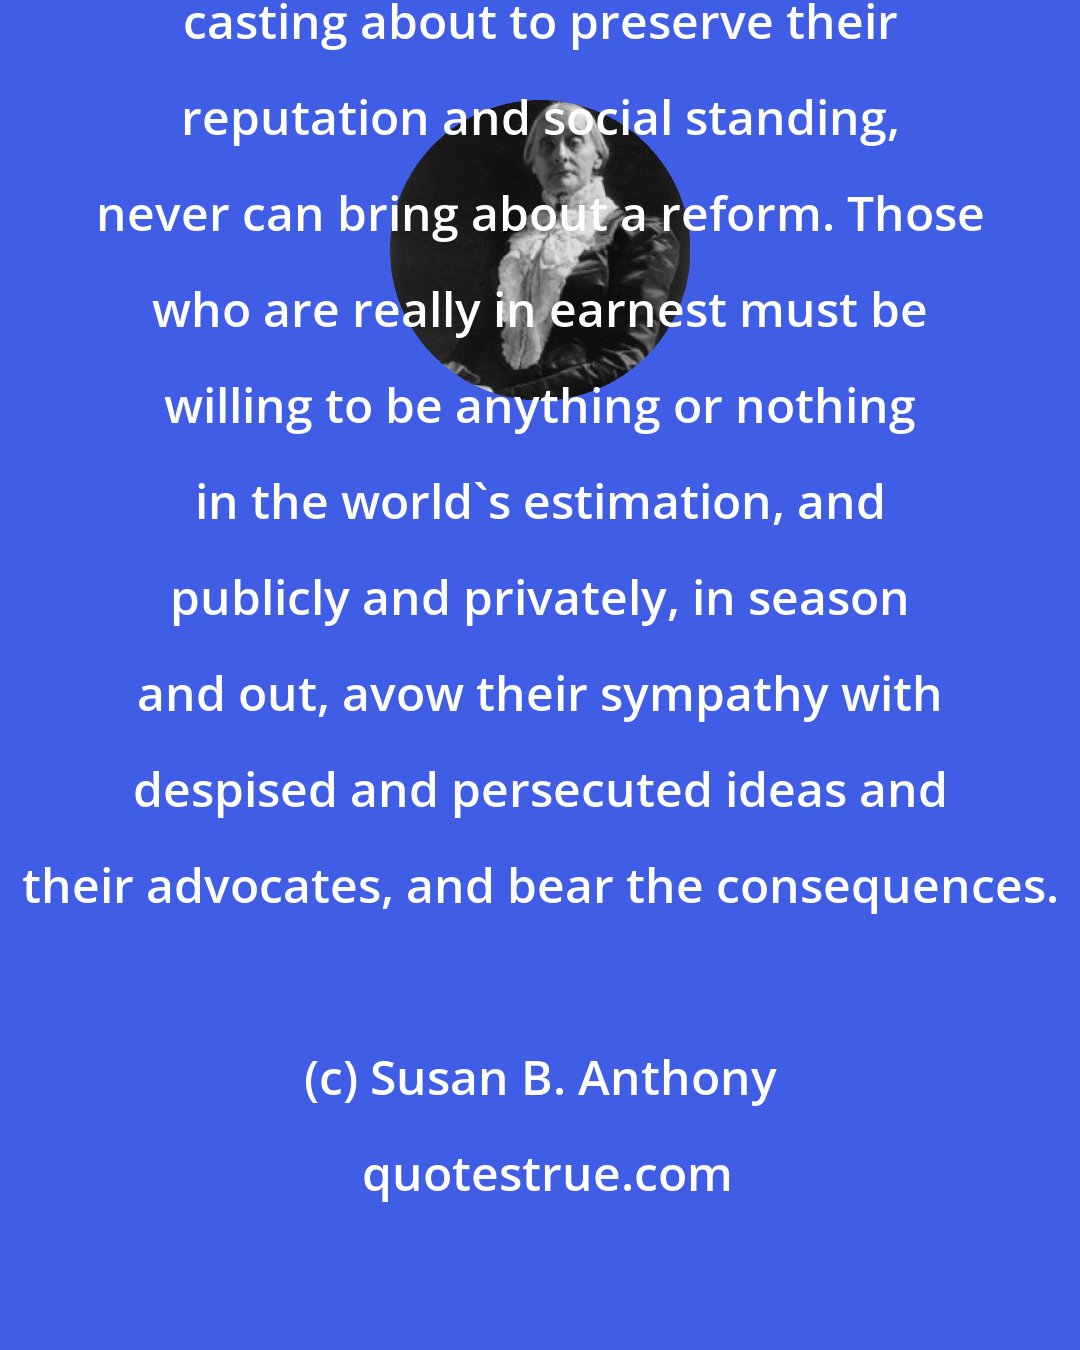 Susan B. Anthony: Cautious, careful people, always casting about to preserve their reputation and social standing, never can bring about a reform. Those who are really in earnest must be willing to be anything or nothing in the world's estimation, and publicly and privately, in season and out, avow their sympathy with despised and persecuted ideas and their advocates, and bear the consequences.